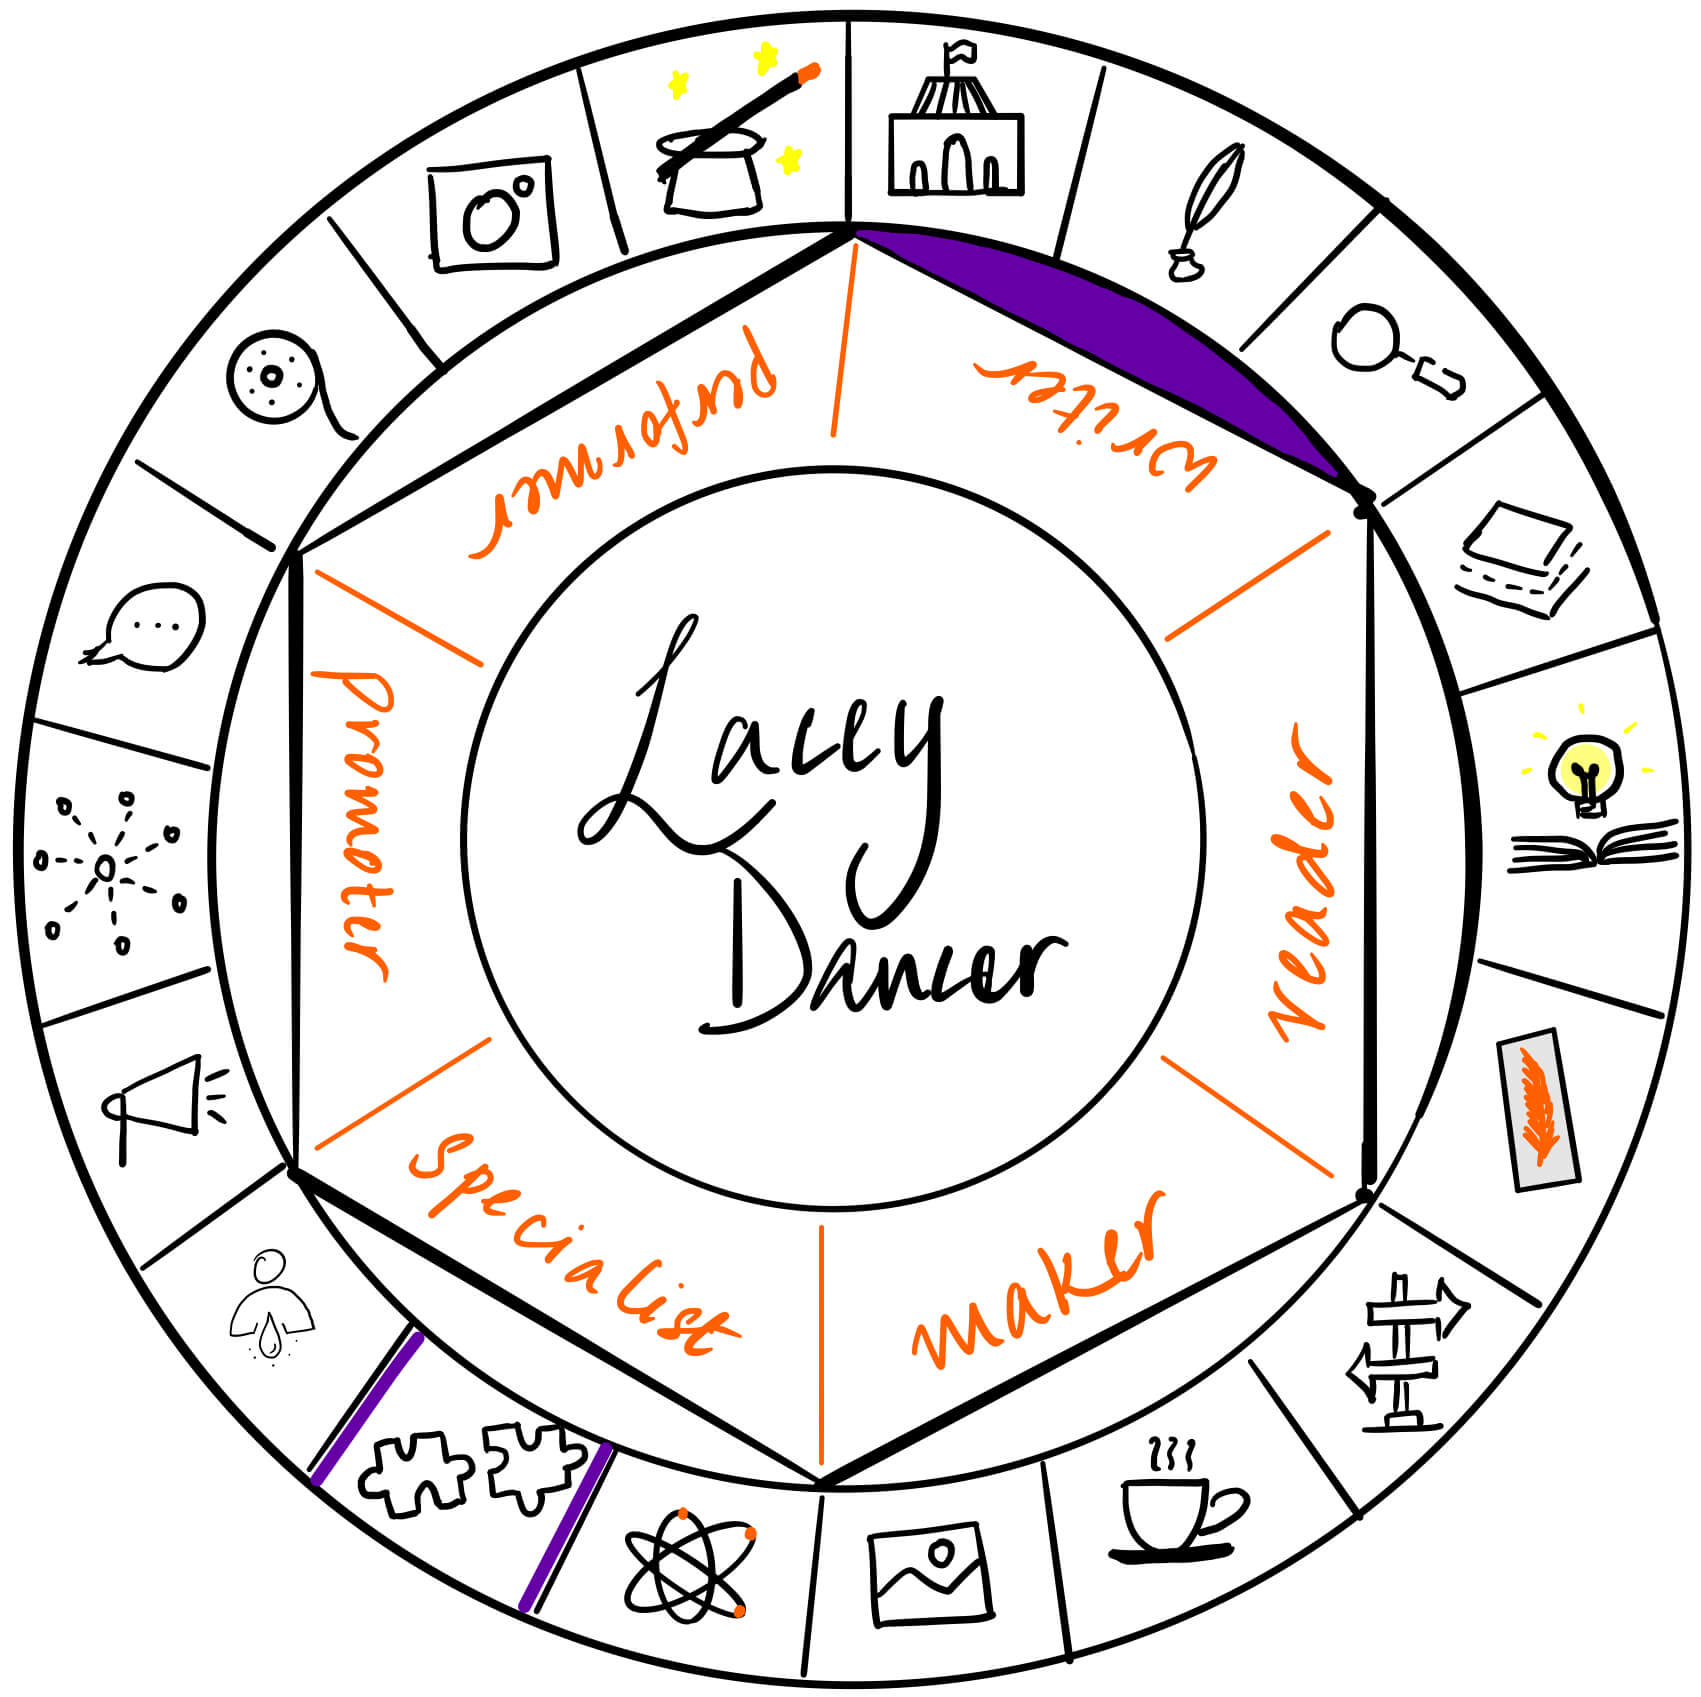 Lacey Dancer is a writer. It's a pleasure to have her over on The Creator's Roulette to share about her adventures in self publishing over the years.